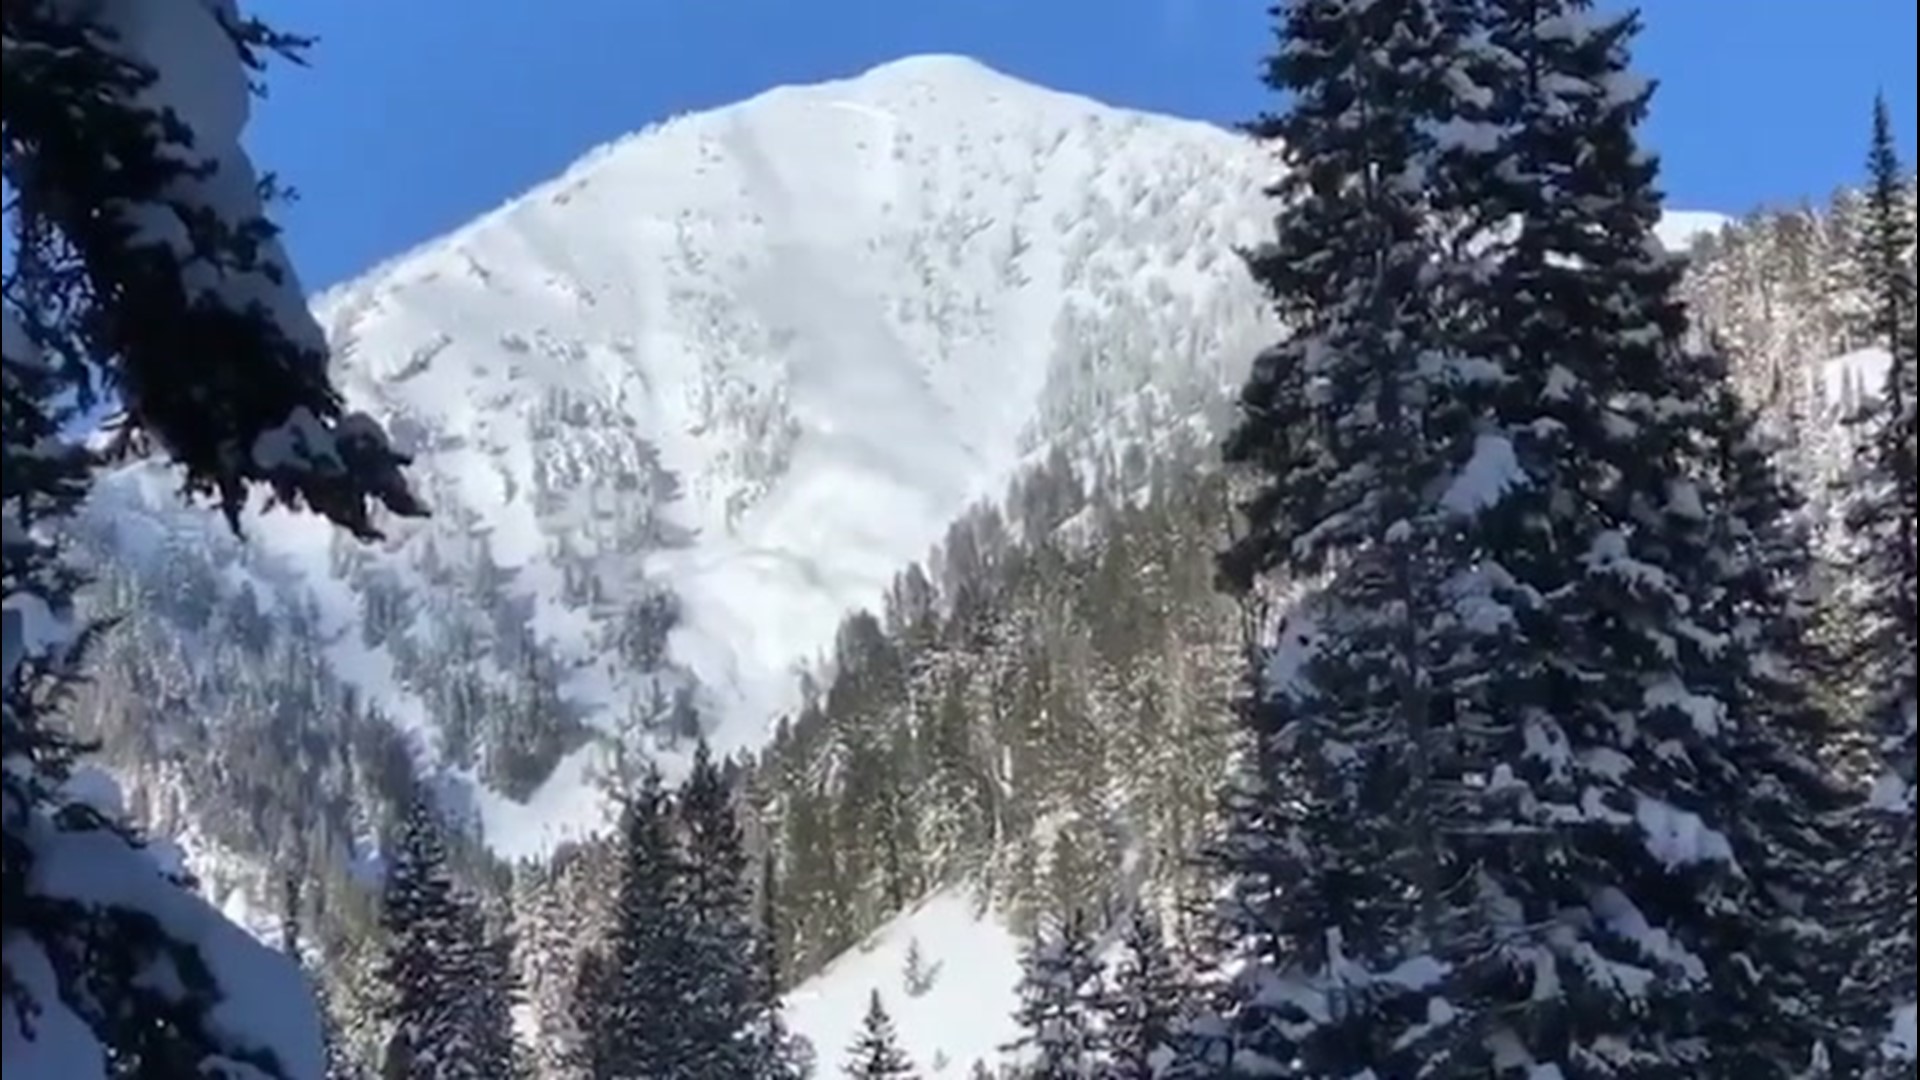 An avalanche believed to be triggered by a skier or snowboarder was just one of many large avalanches to occur in Teton Pass, Wyoming, in the days leading up to Jan. 15.